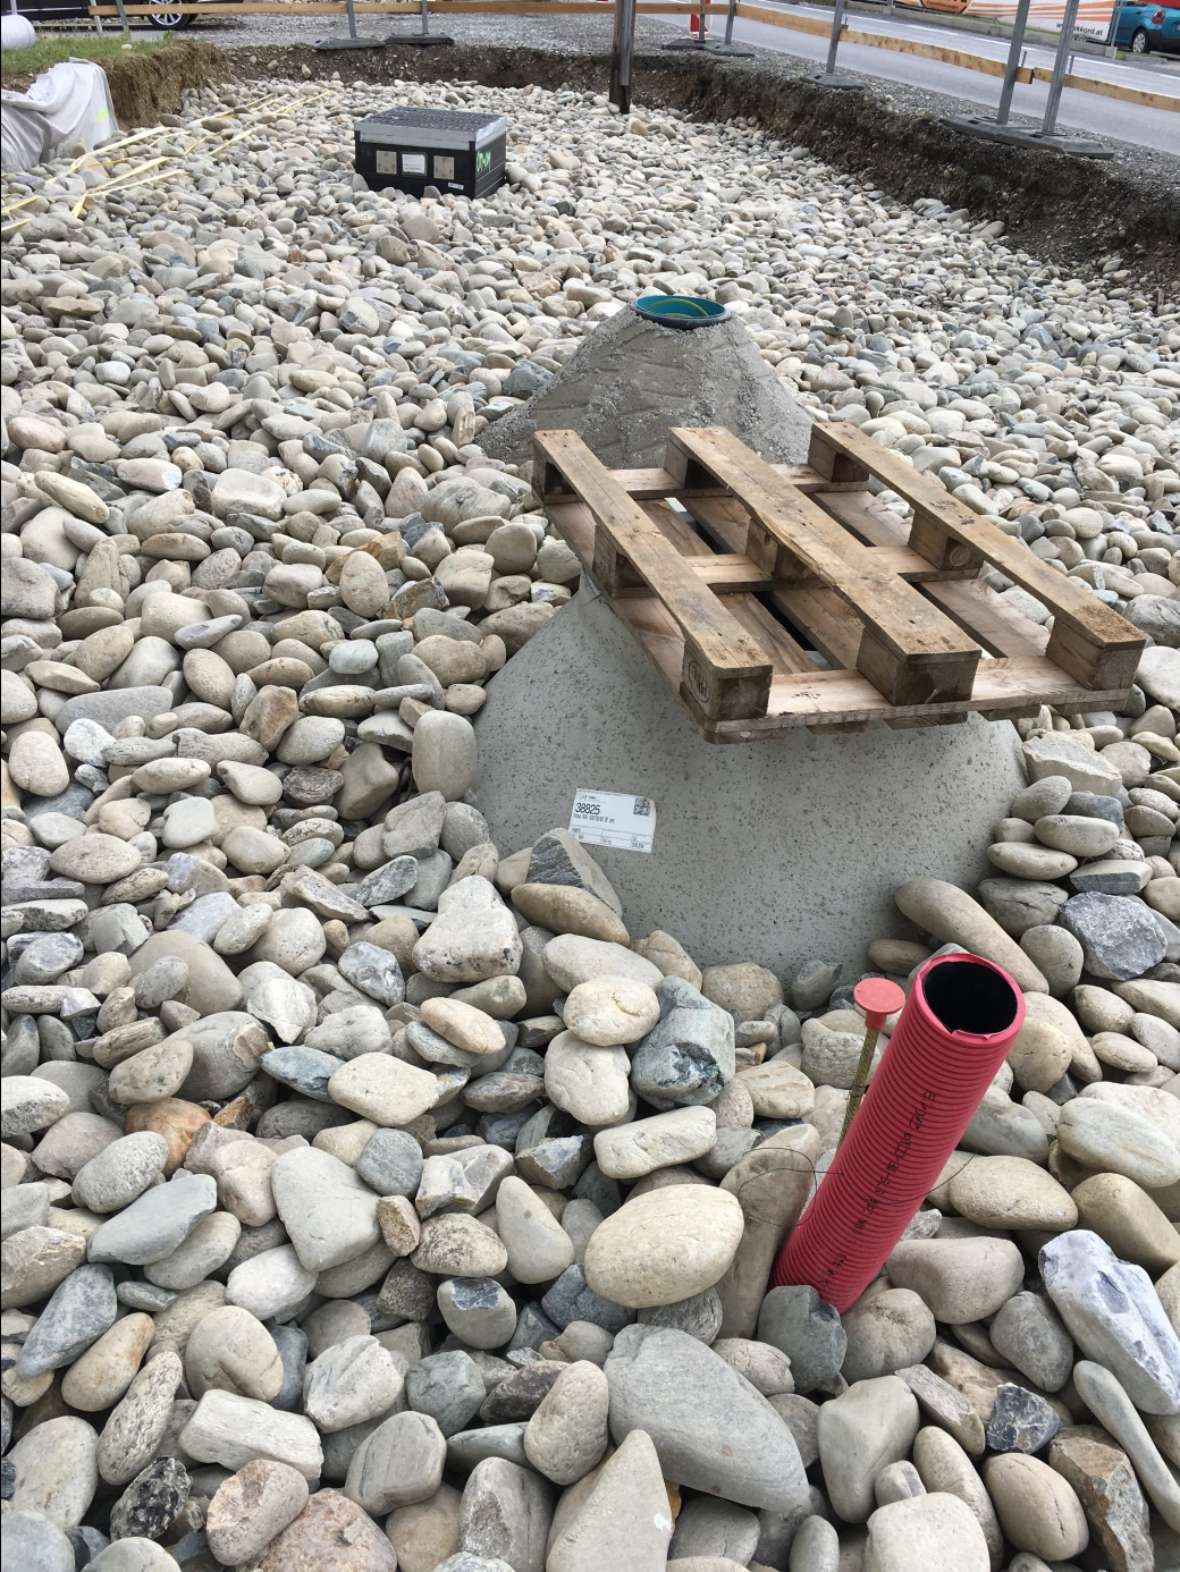 The picture shows the structural substrate of the Gradnerstrasse test facility in Graz. In the very front a red pipe, behind it 2 concrete blocks. The soil is covered with approximal 5 to 20 cm stones.